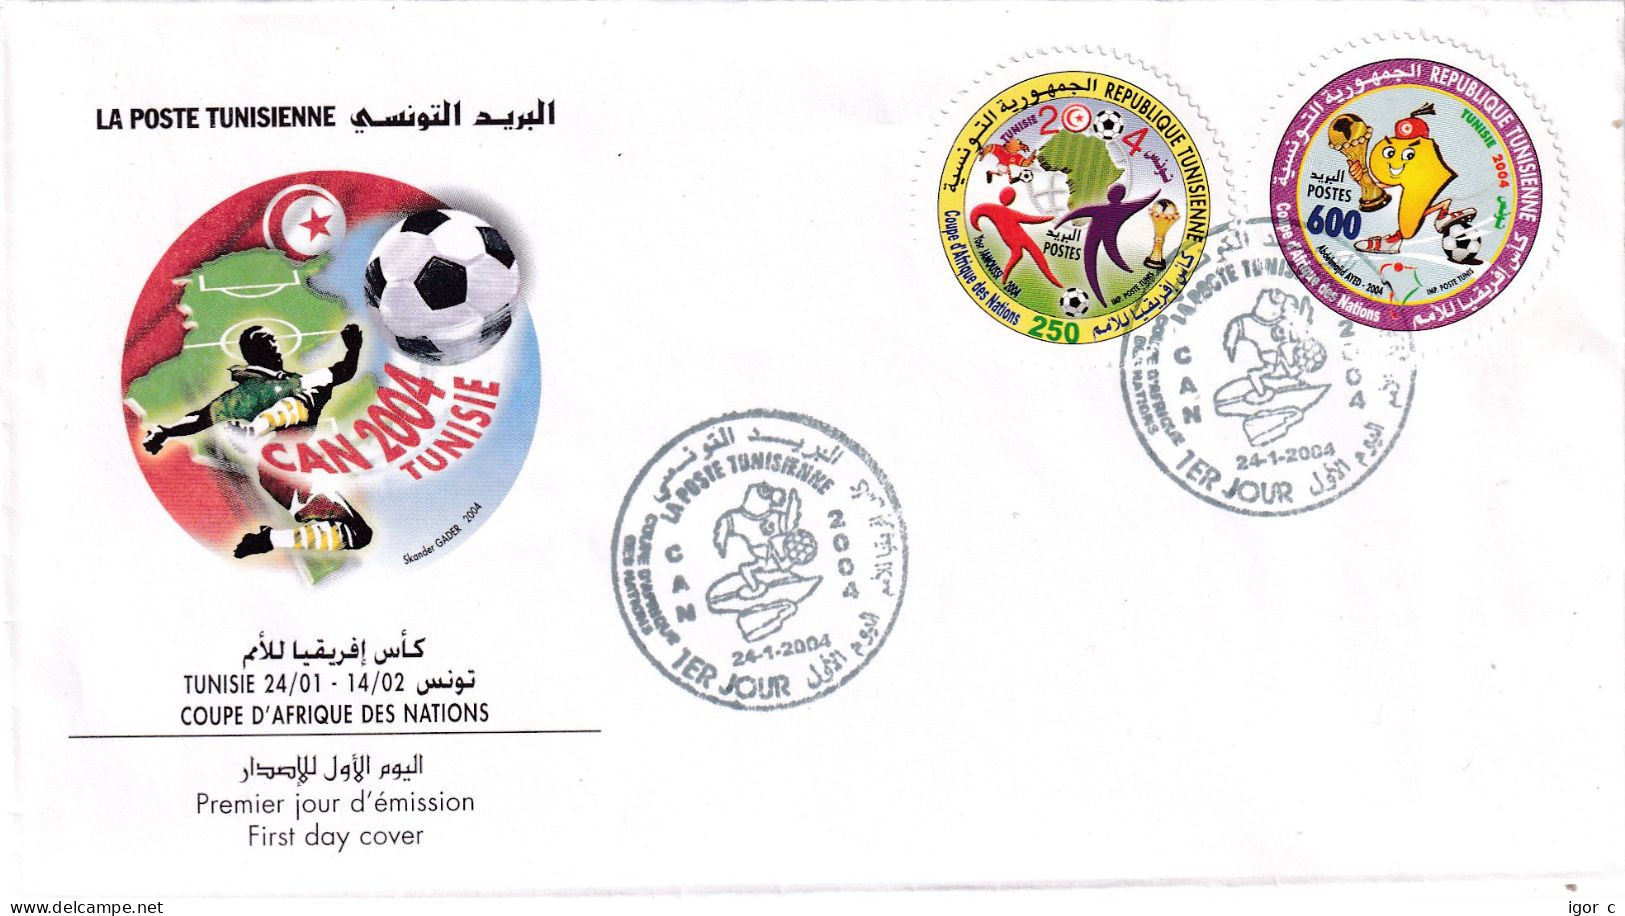 Tunis Tunisia 2004 Cover; Football Fussball Soccer Calcio; Coupe D'Afrique Des Nations - Africa Cup Of Nations